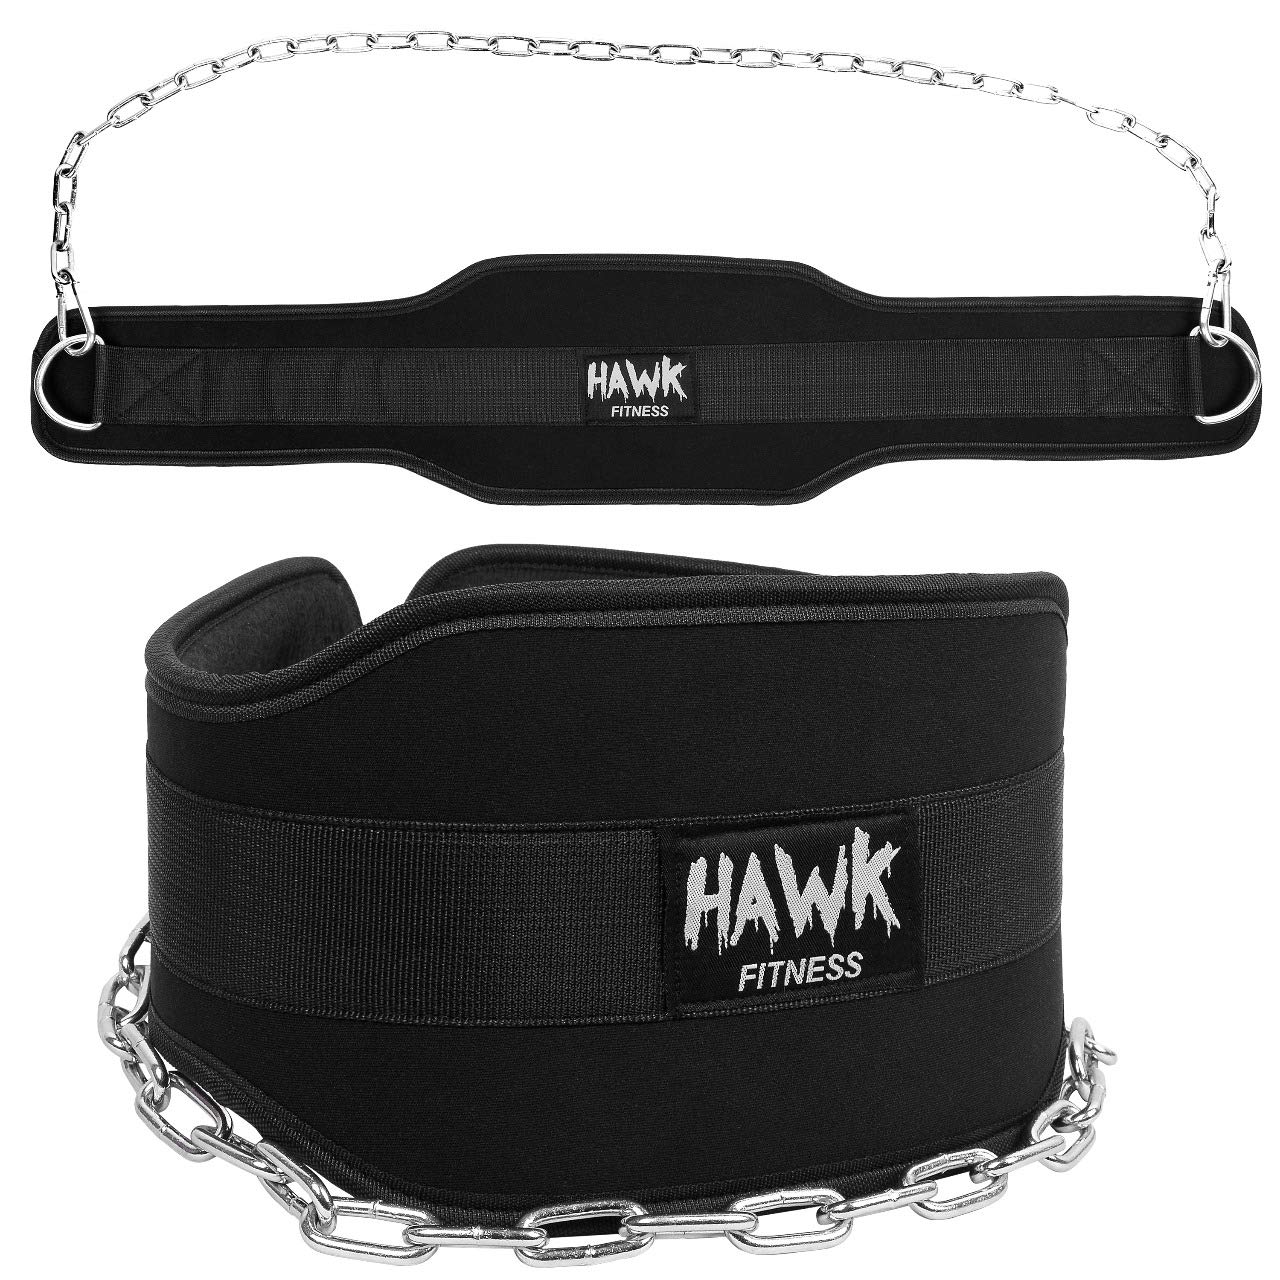 Hawk Fitness Dip Belt With Chain For Men & Women Dipping Pull Up Belt Crossfit Weight Lifting Training Gym Bodybuilding Weightlifting!